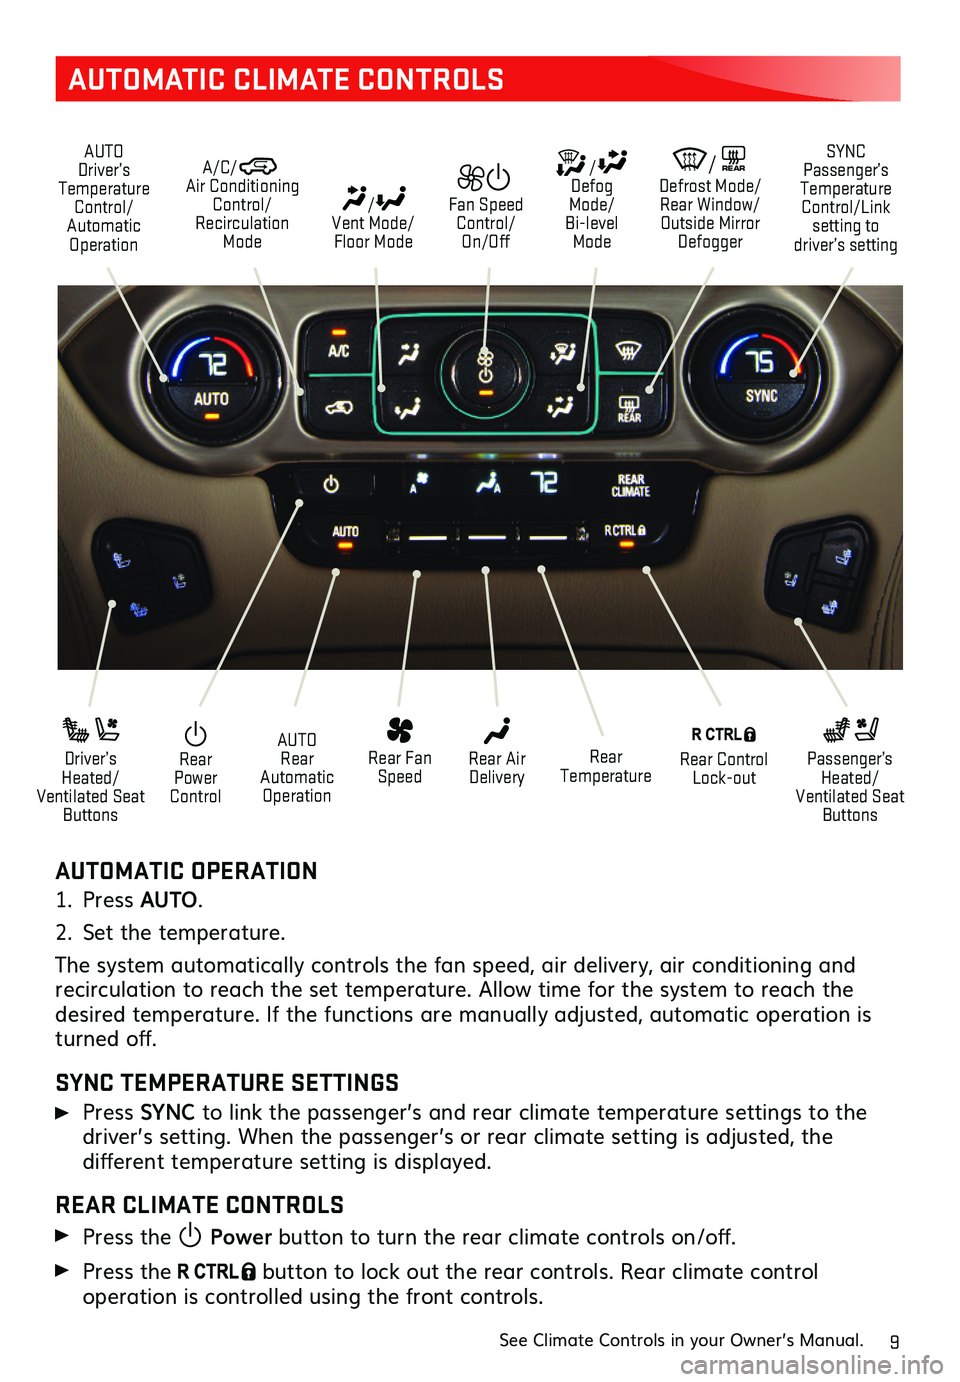 GMC YUKON 2019  Get To Know Guide 9
AUTOMATIC CLIMATE CONTROLS
AUTOMATIC OPERATION
1. Press AUTO.
2. Set the temperature. 
The system automatically   controls the fan speed, air delivery, air conditioning and recirculation to reach th